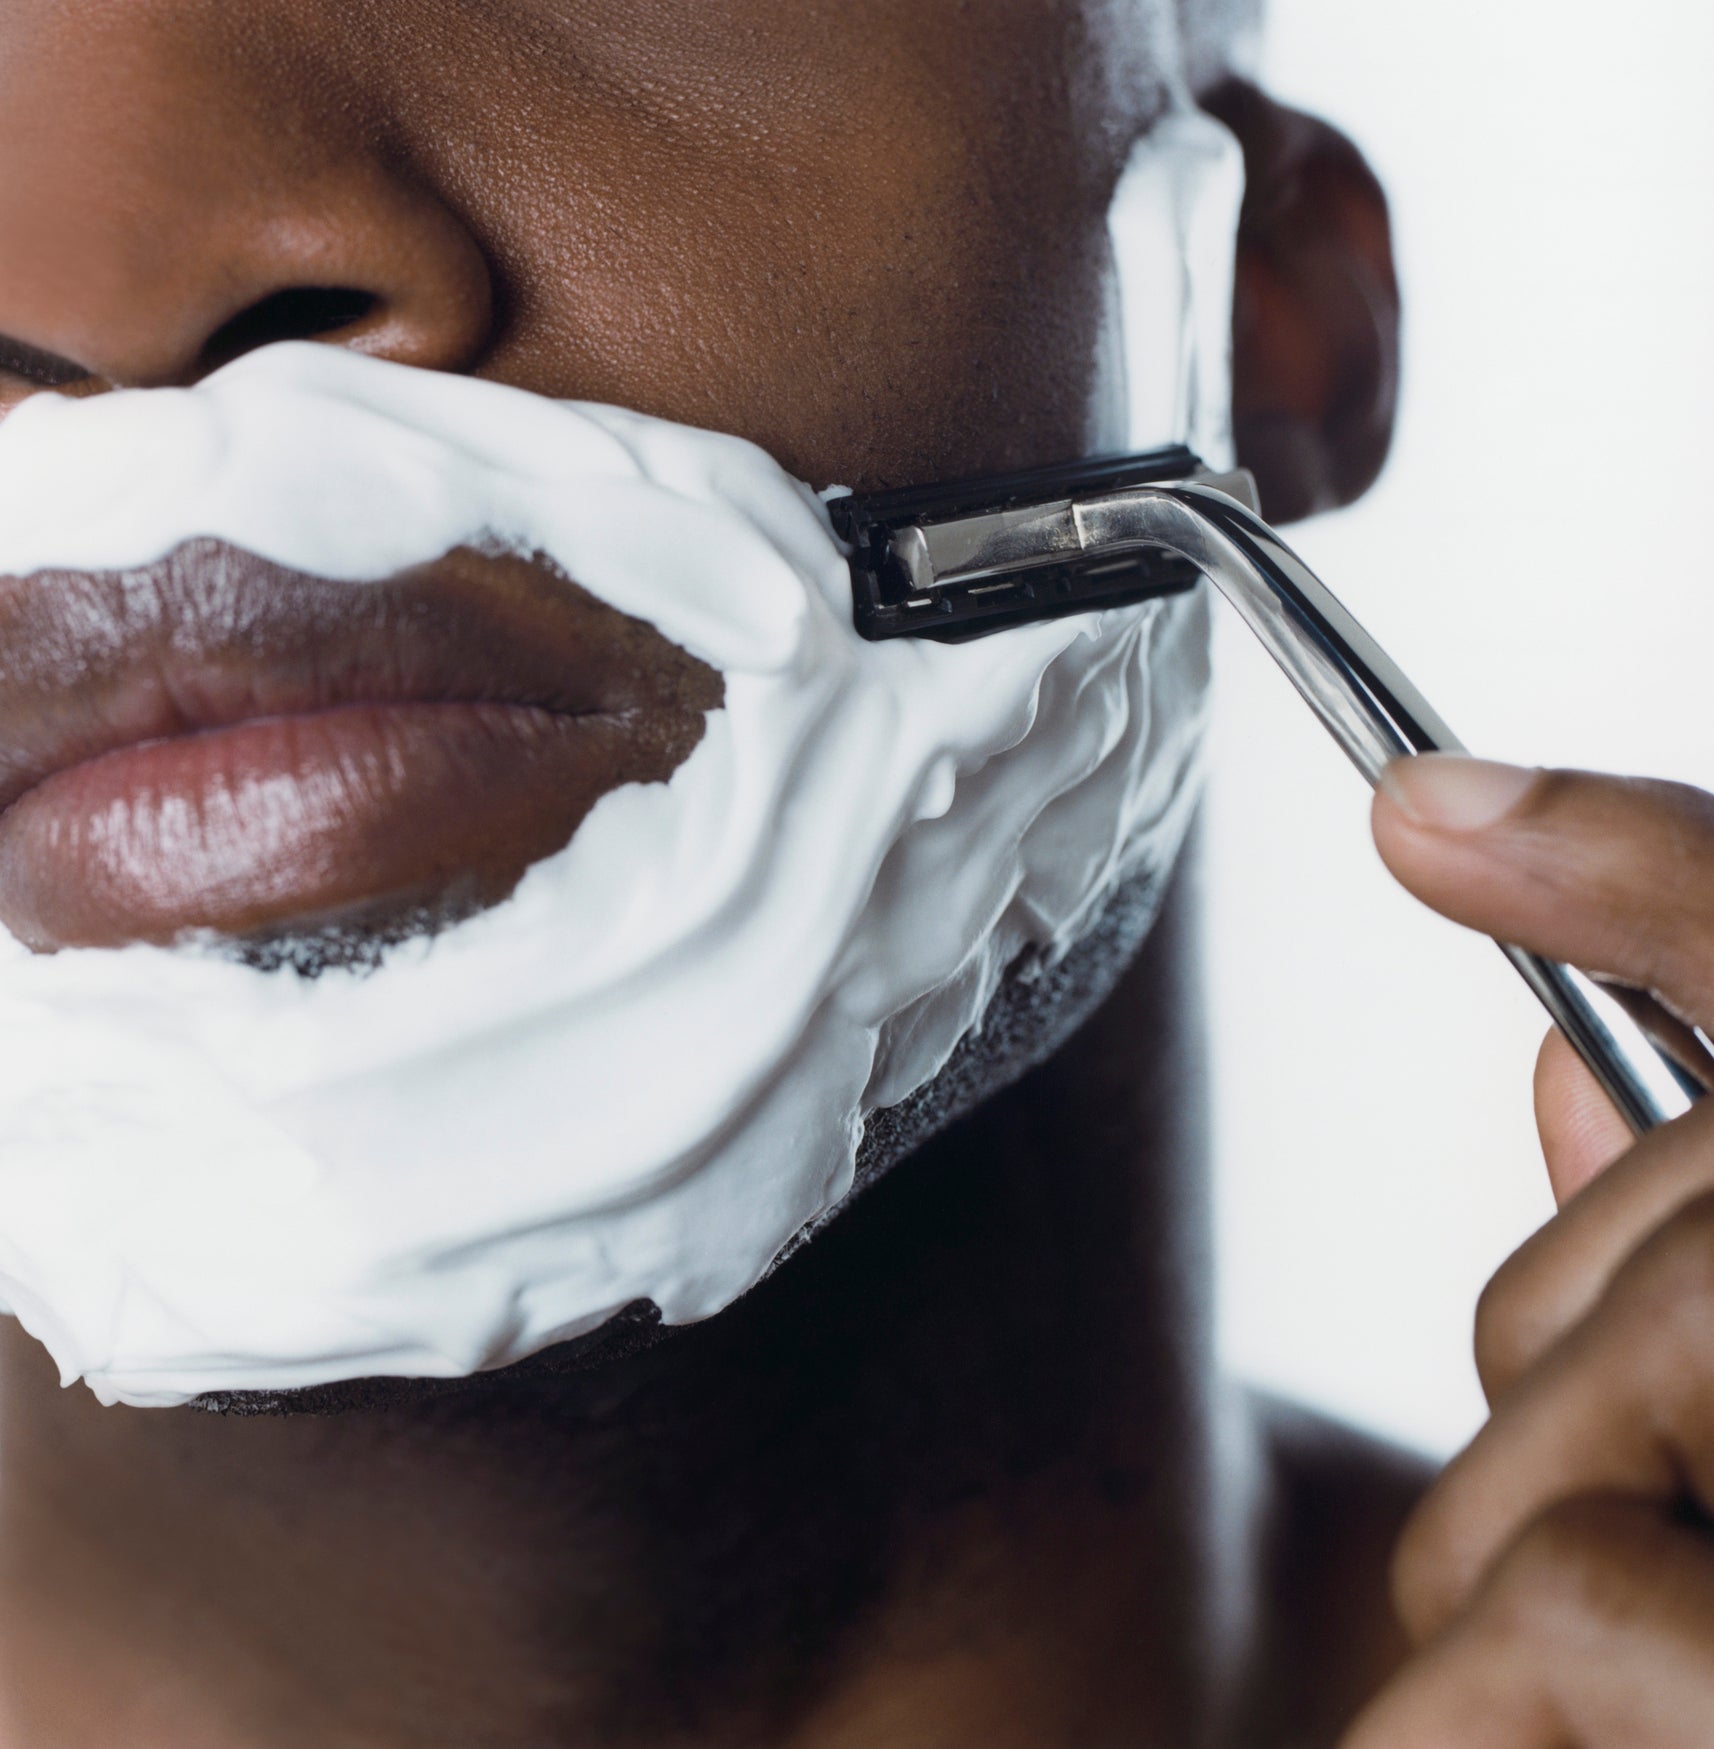 10 Grooming Products He'll Love Under $10
